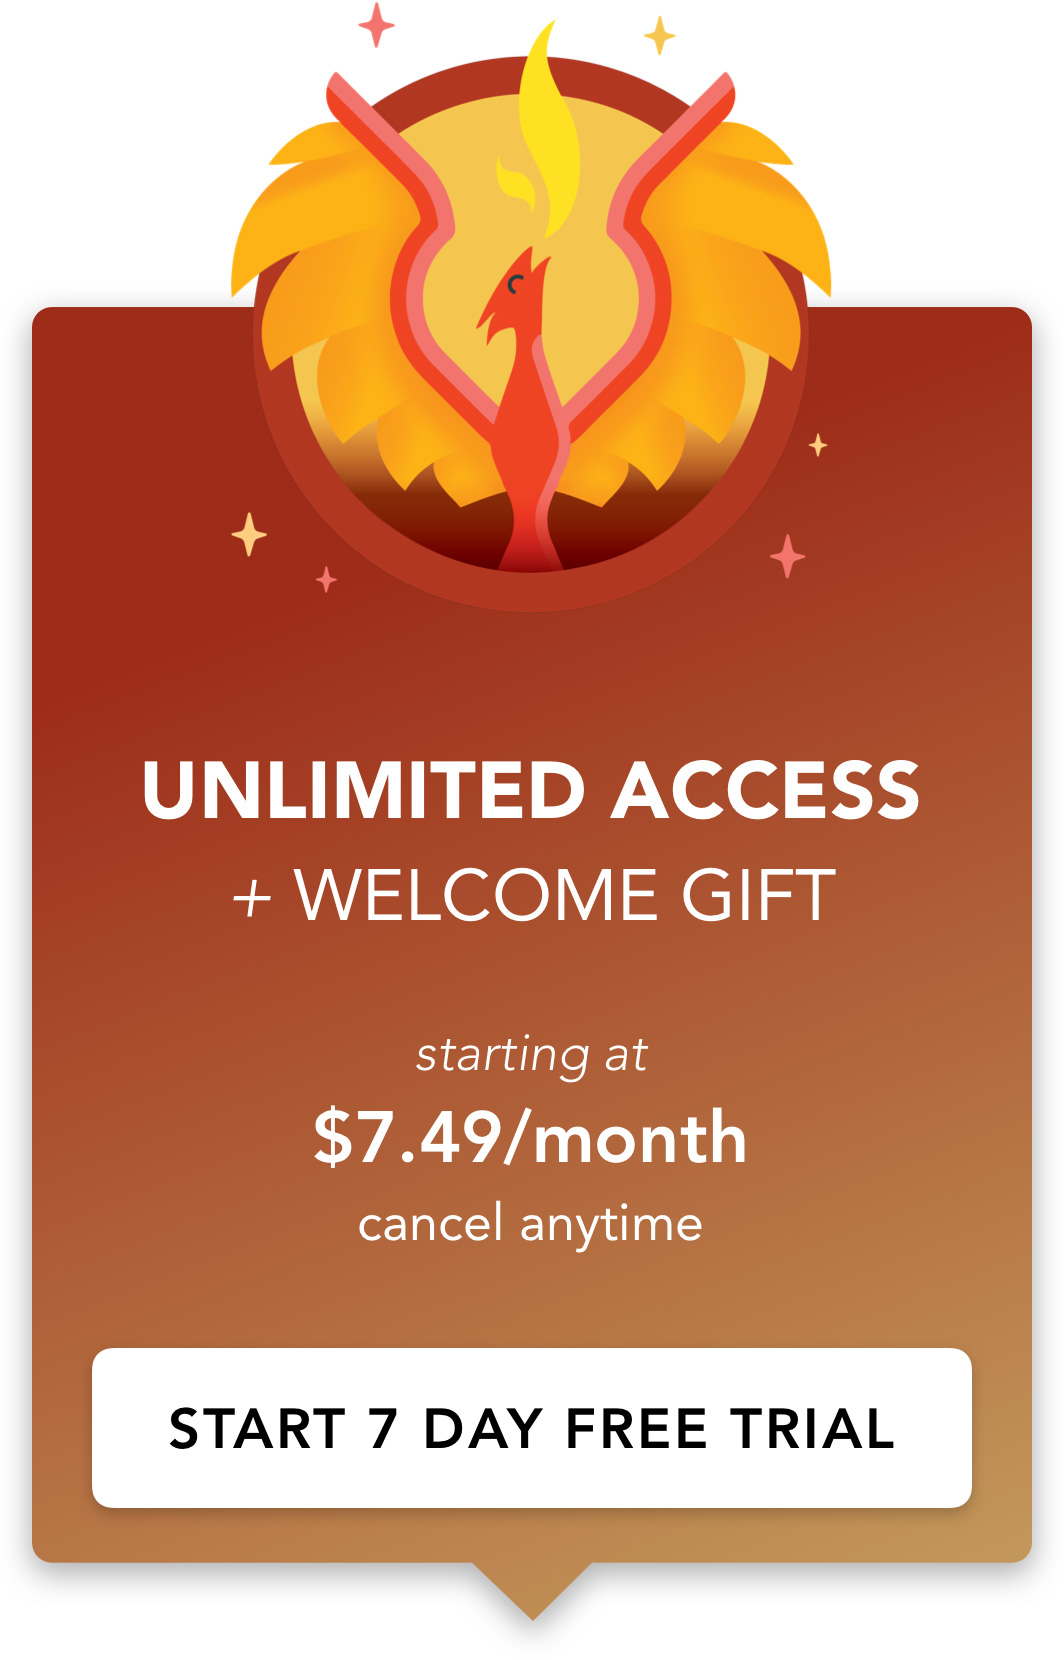 UNLIMITED ACCESS + FREE GIFT